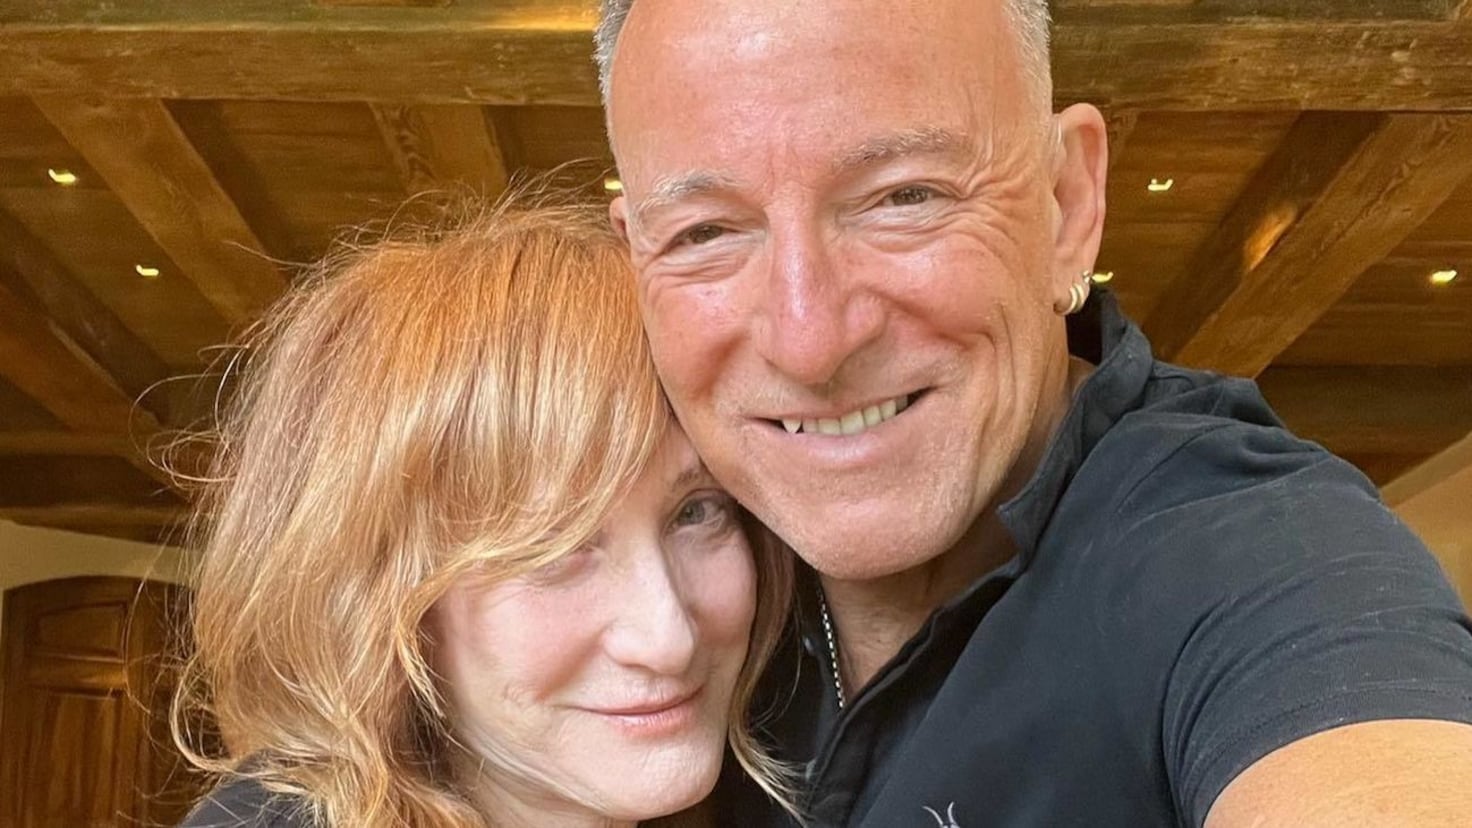 This is Bruce Springsteen's personal life: married to his backup singer for 33 years
